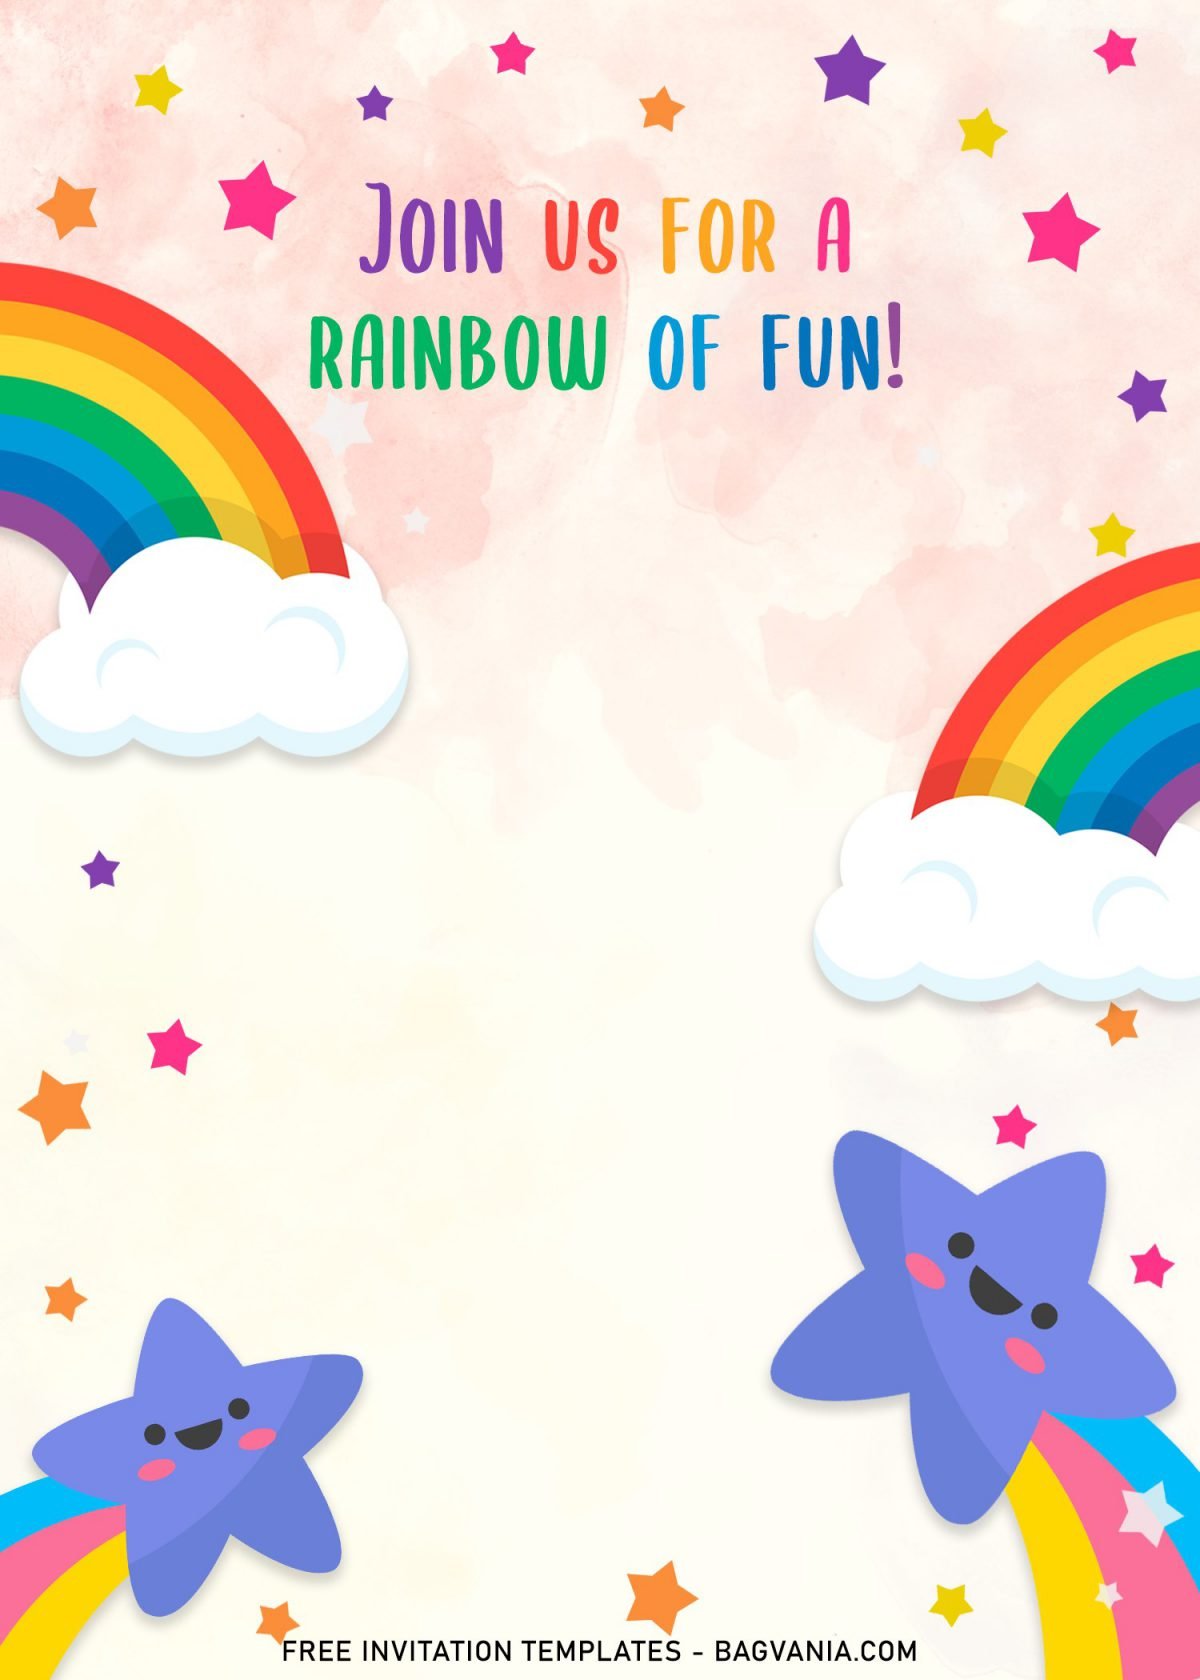 9+ Colorful Rainbow Invitation Card Templates For A Whimsical Birthday Party and has fluffy white clouds and colorful wording